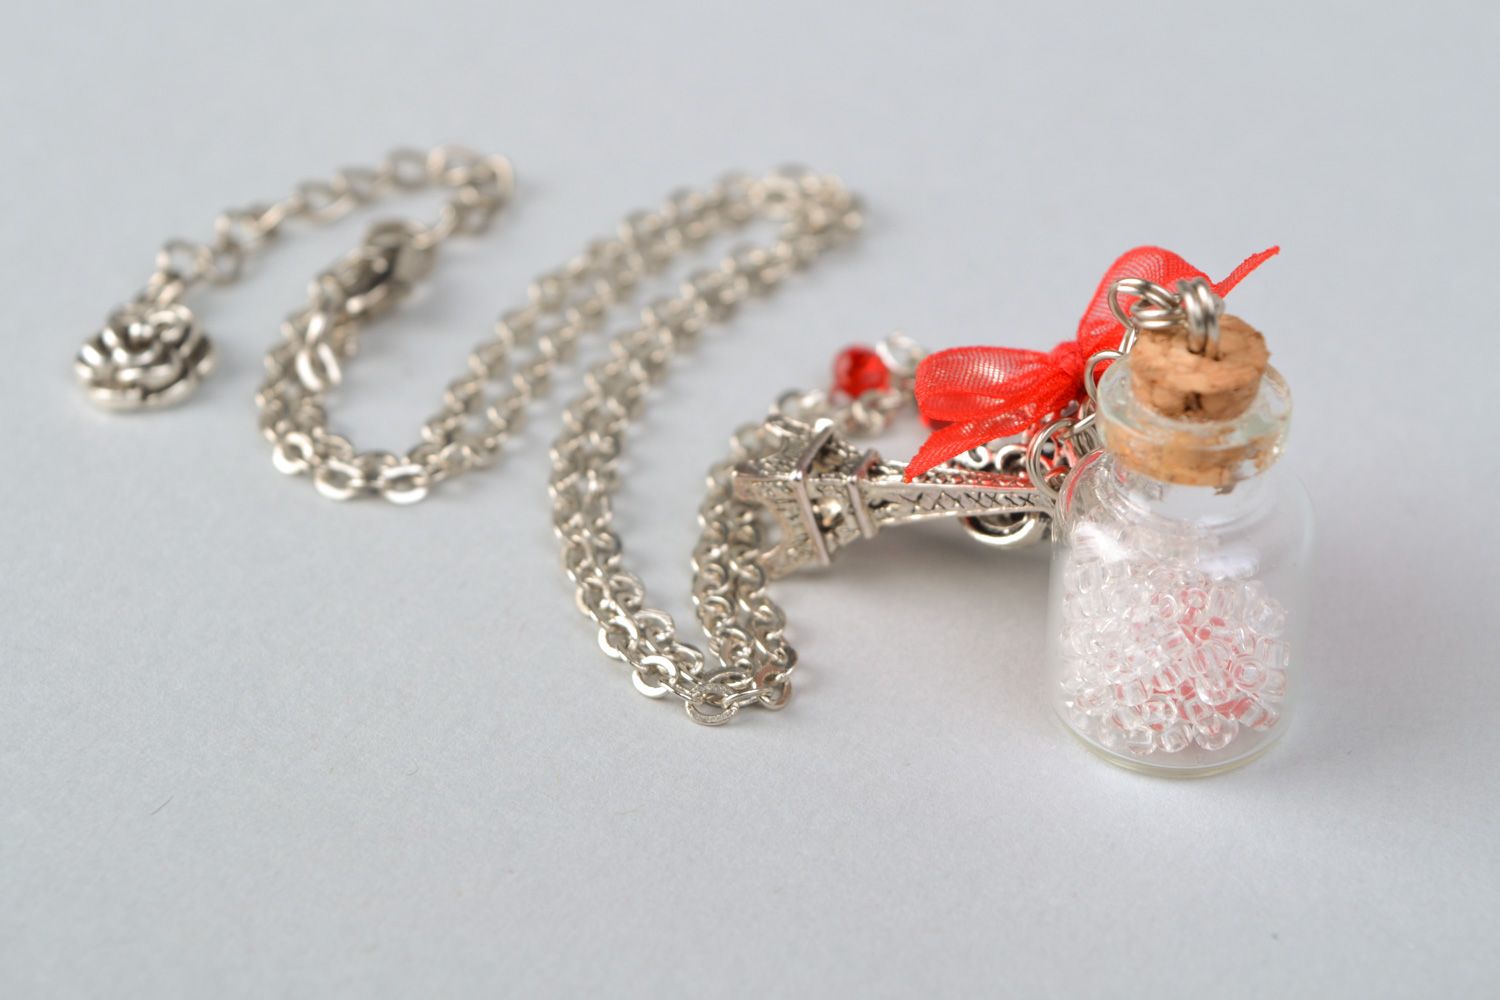 Handmade glass bottle pendant on long chain with metal charm for women photo 5